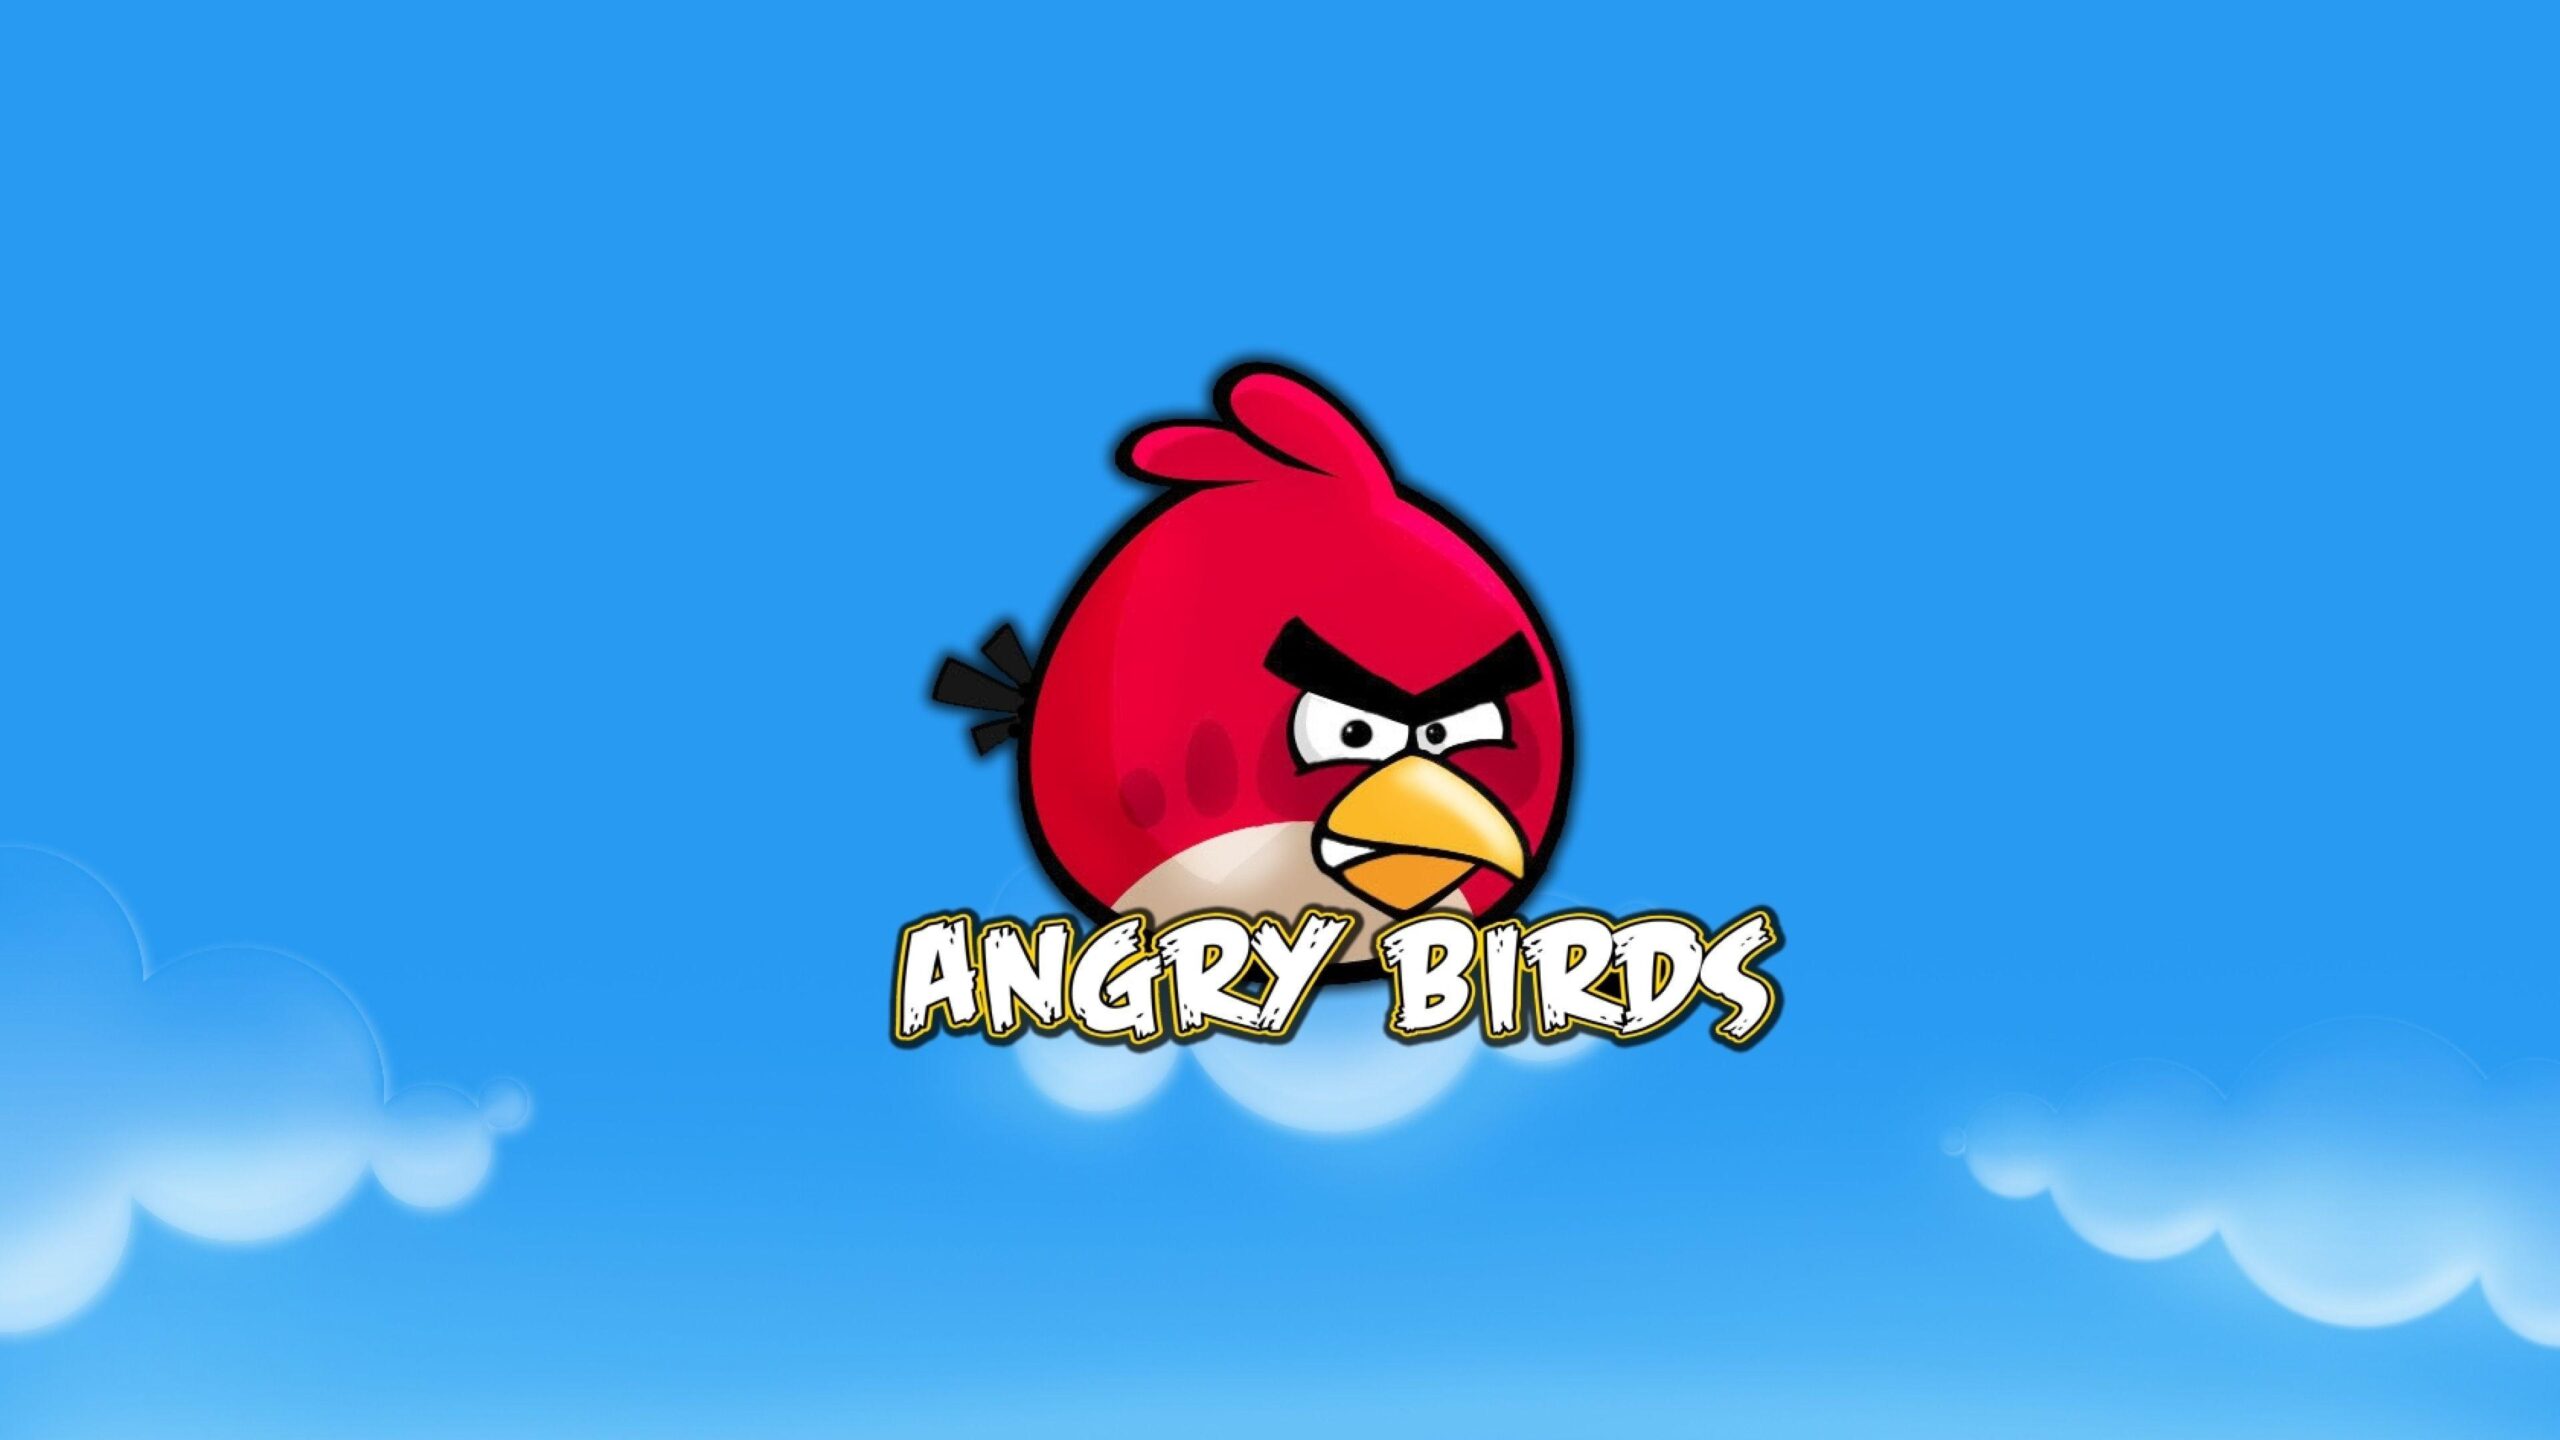 Angry Birds Desktop Wallpapers, Angry Birds, Game